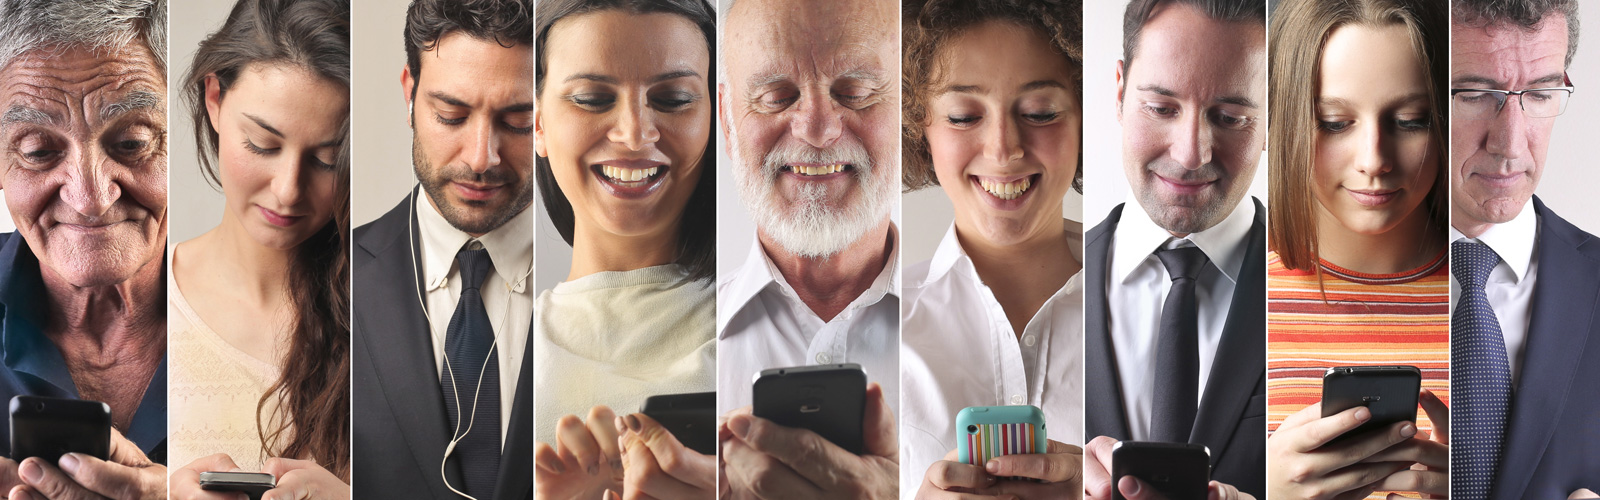 Patients with Poor Oral Hygiene Habits? There's an App for That!